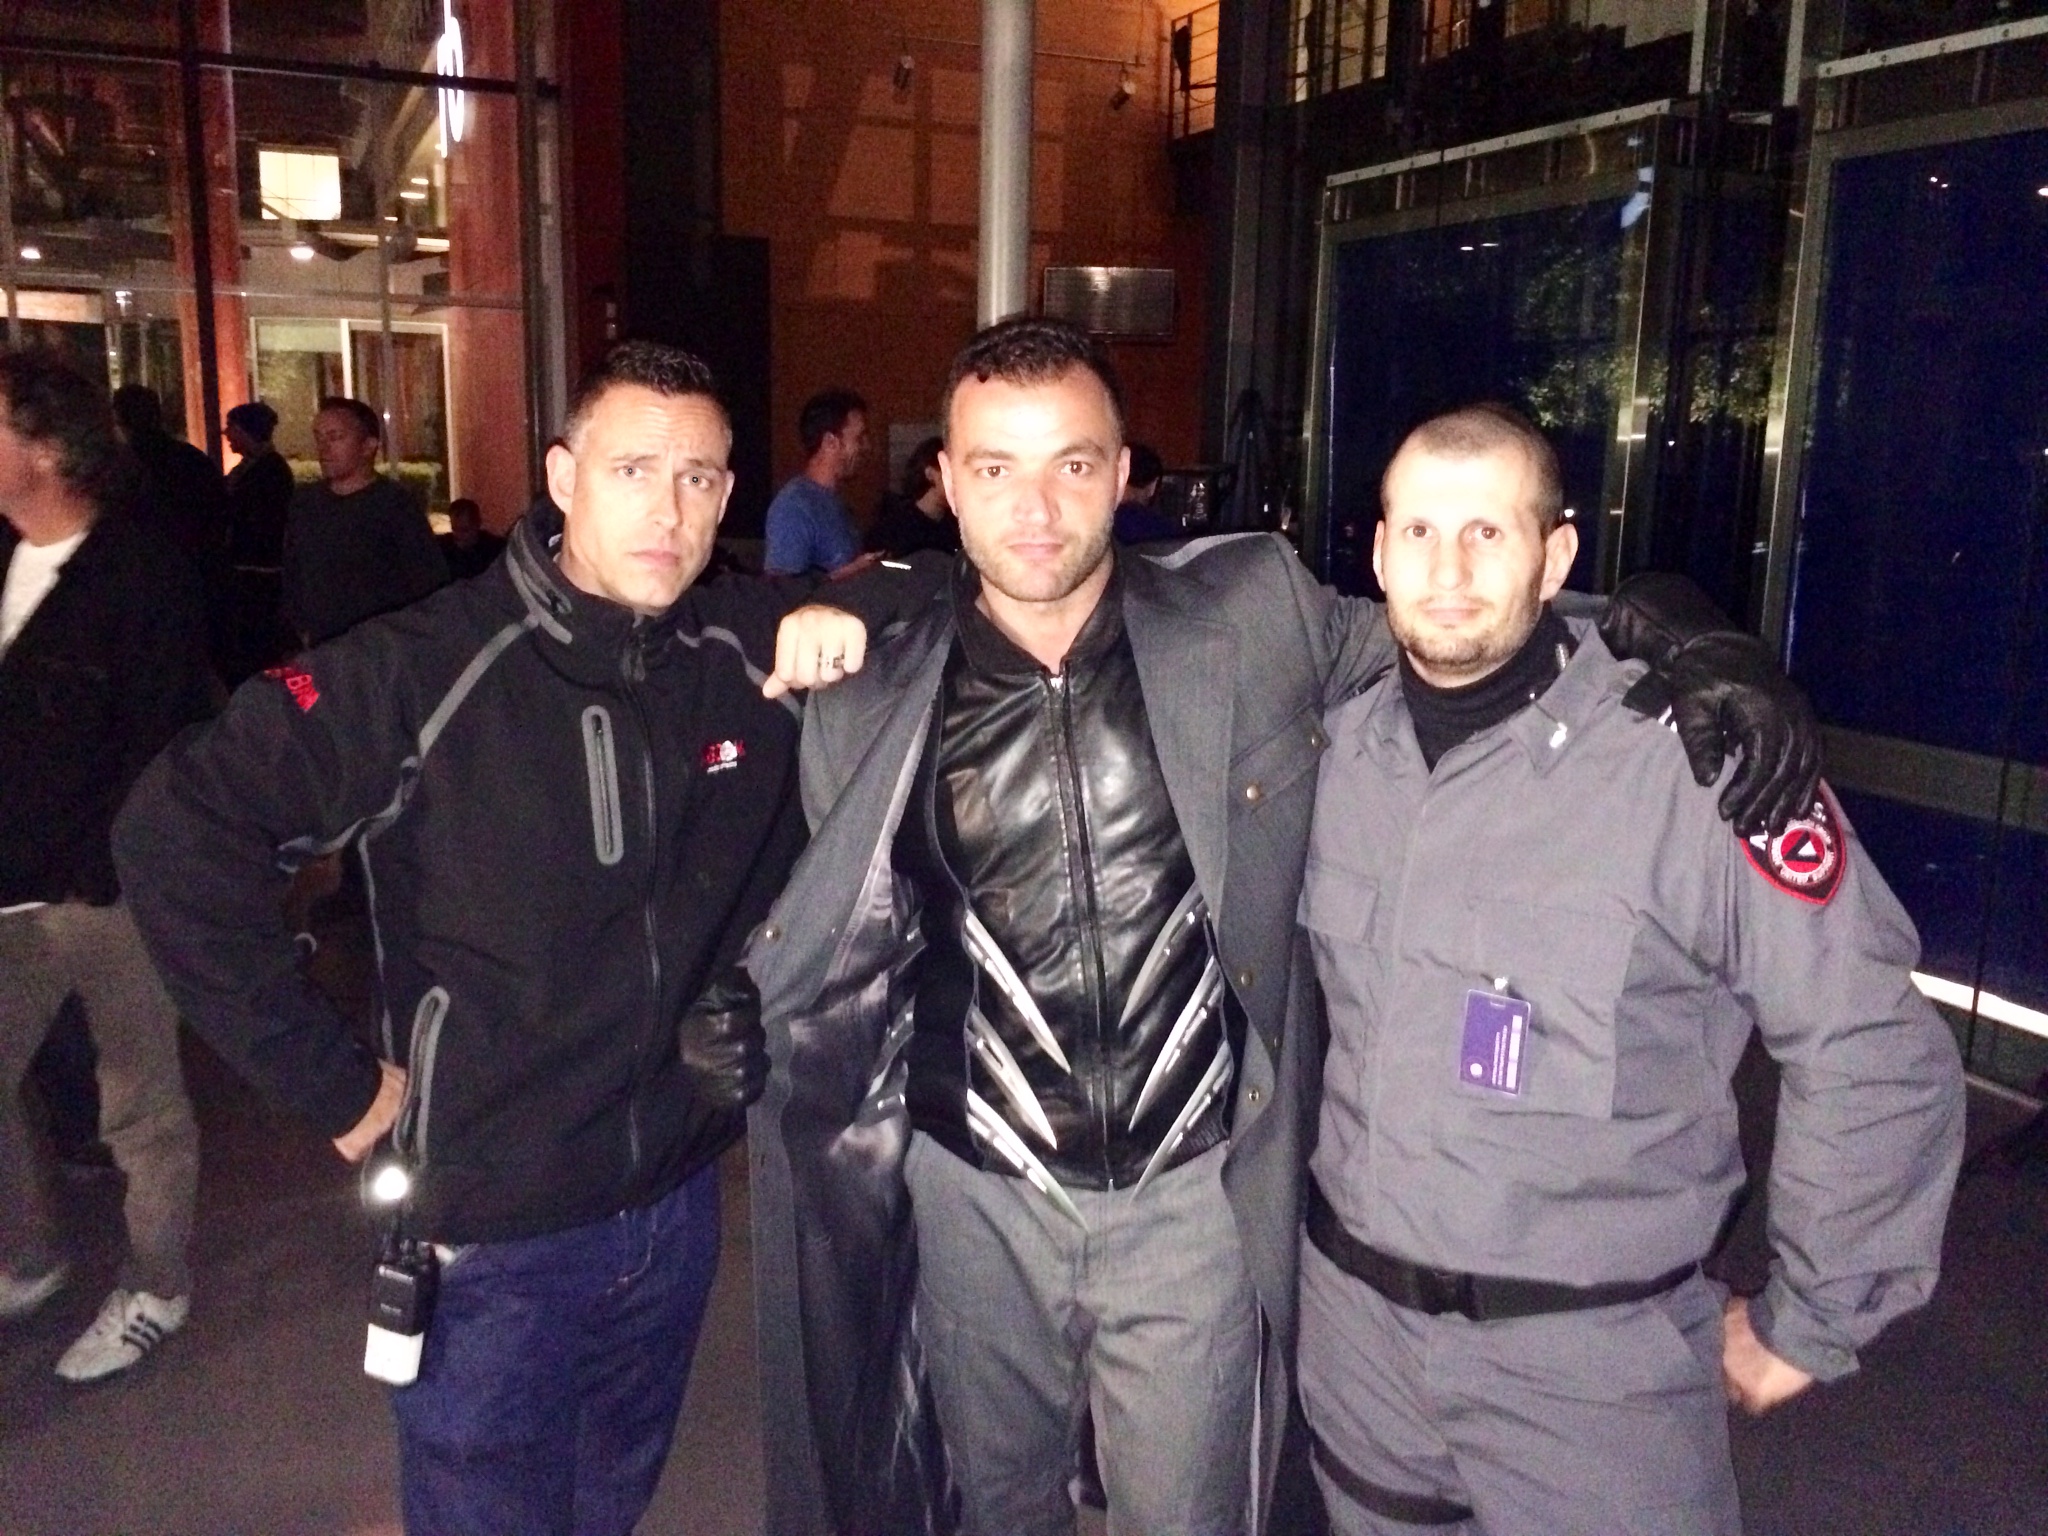 Acting in a scene with Nick Tarabay and Stunt Coordinator for Arrow James Bamford.